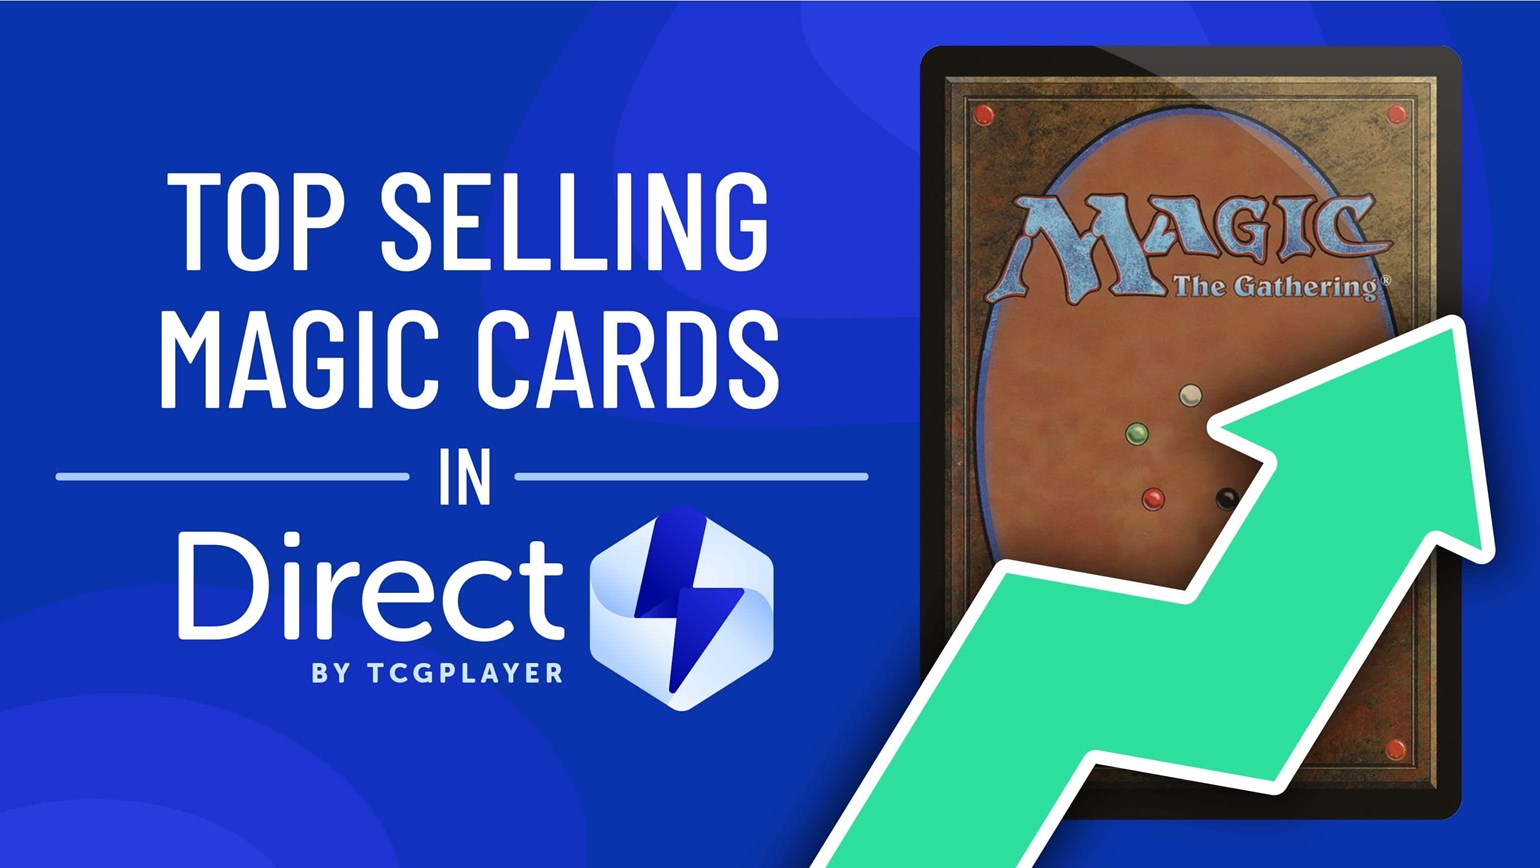 November Top Selling Magic: The Gathering Cards in Direct by TCGplayer